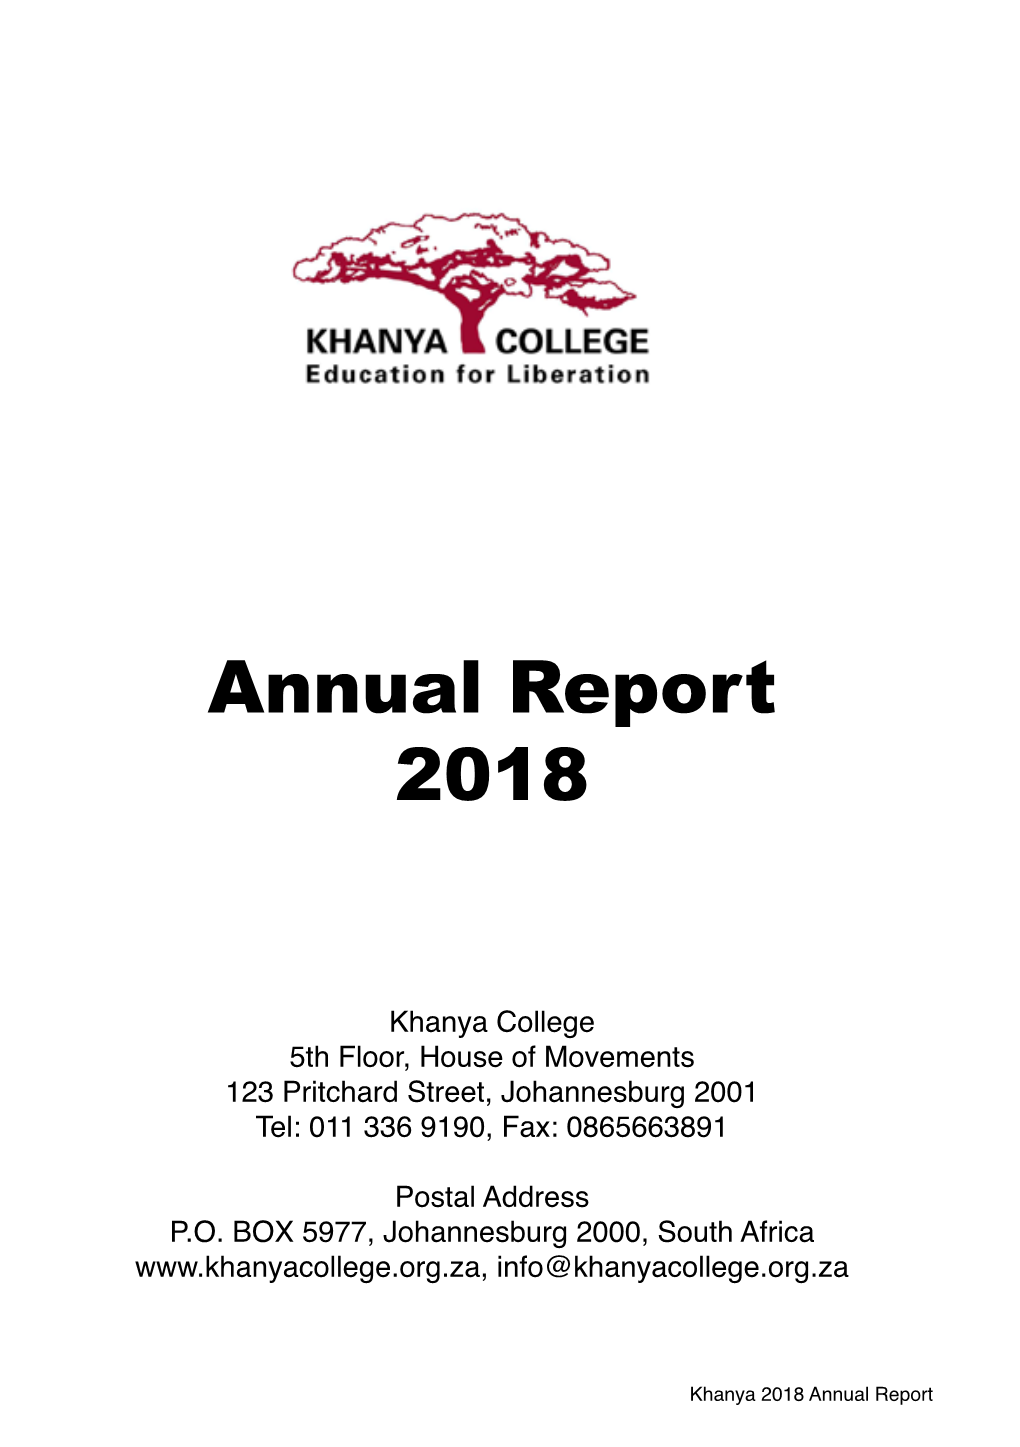 2018 Annual Report Contents